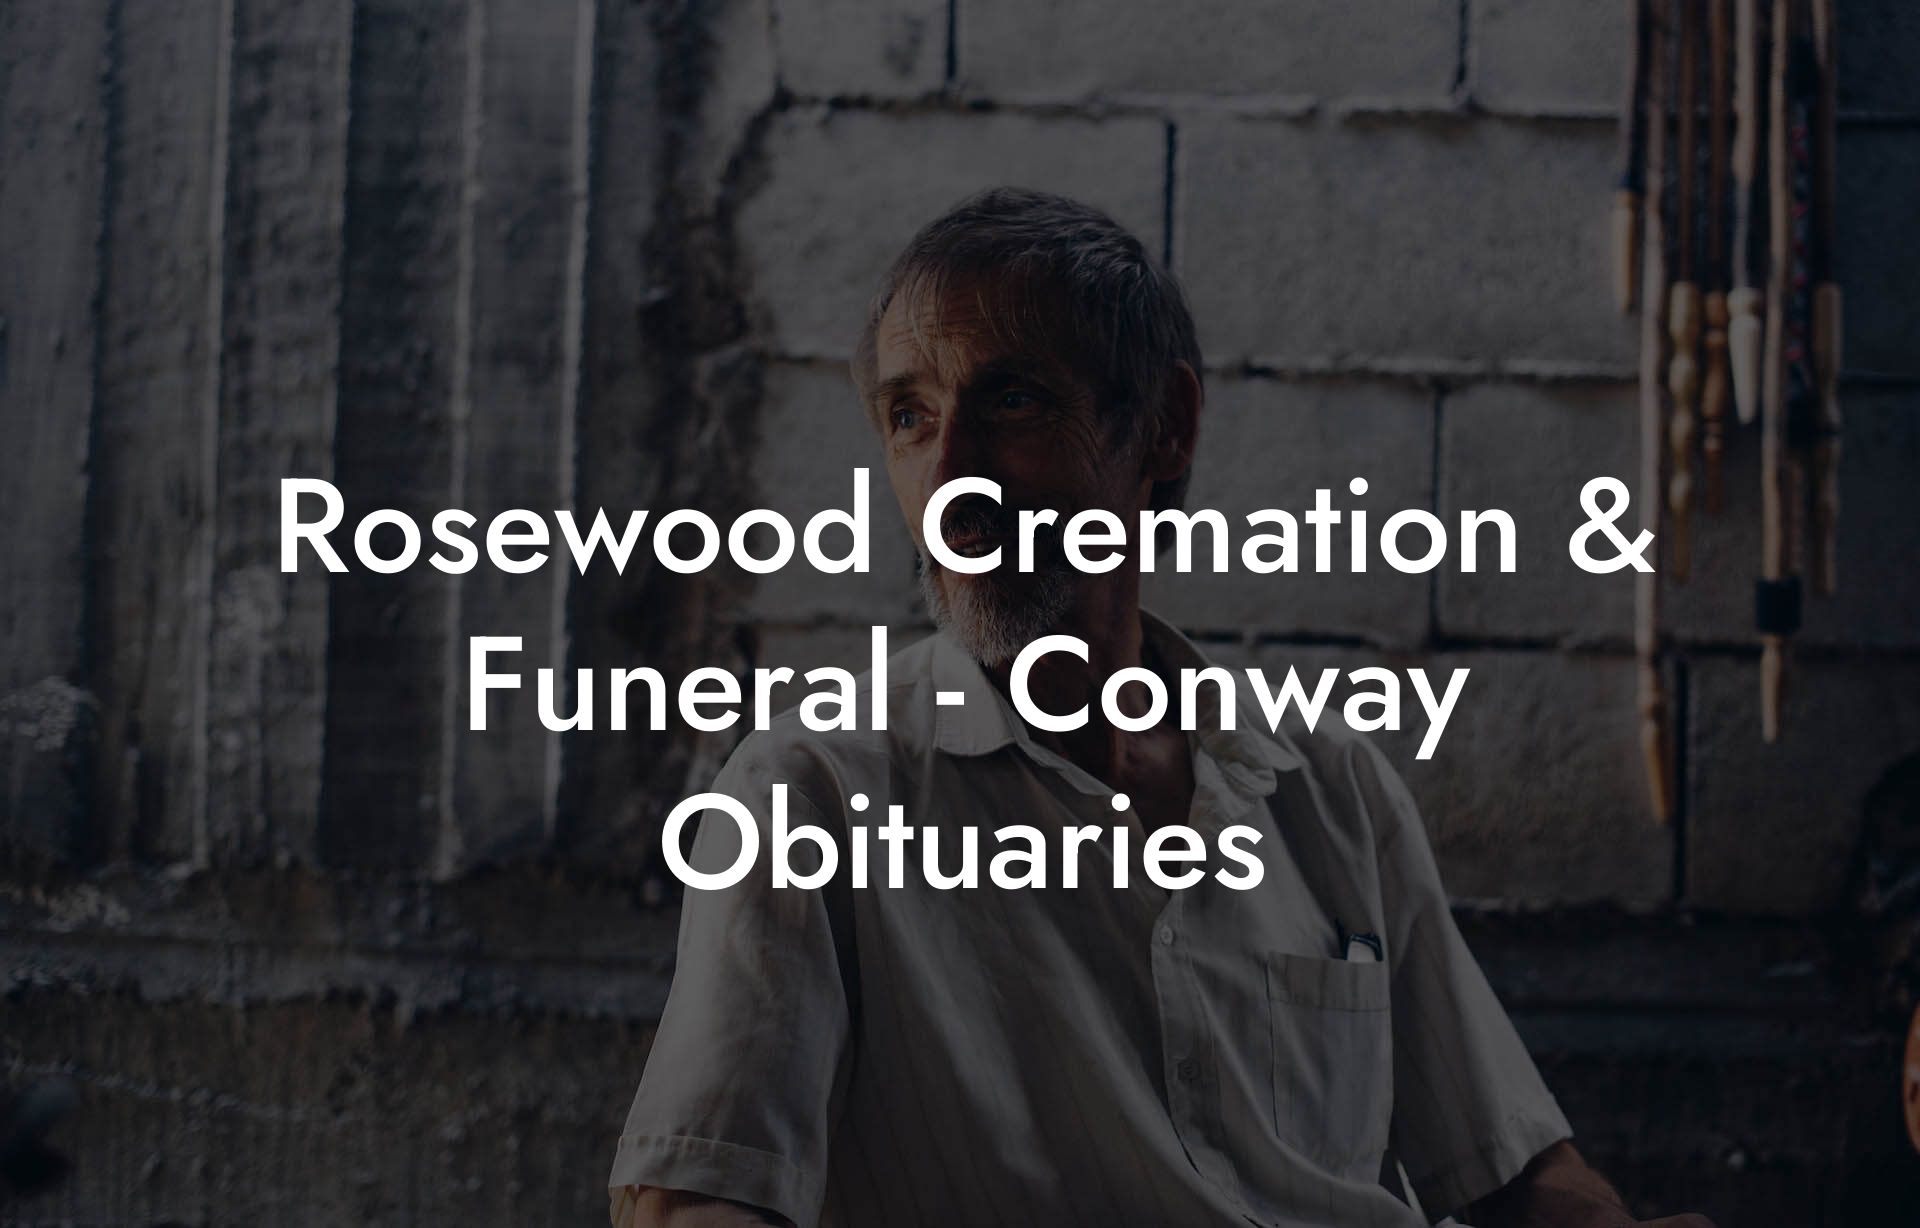 Rosewood Cremation & Funeral - Conway Obituaries